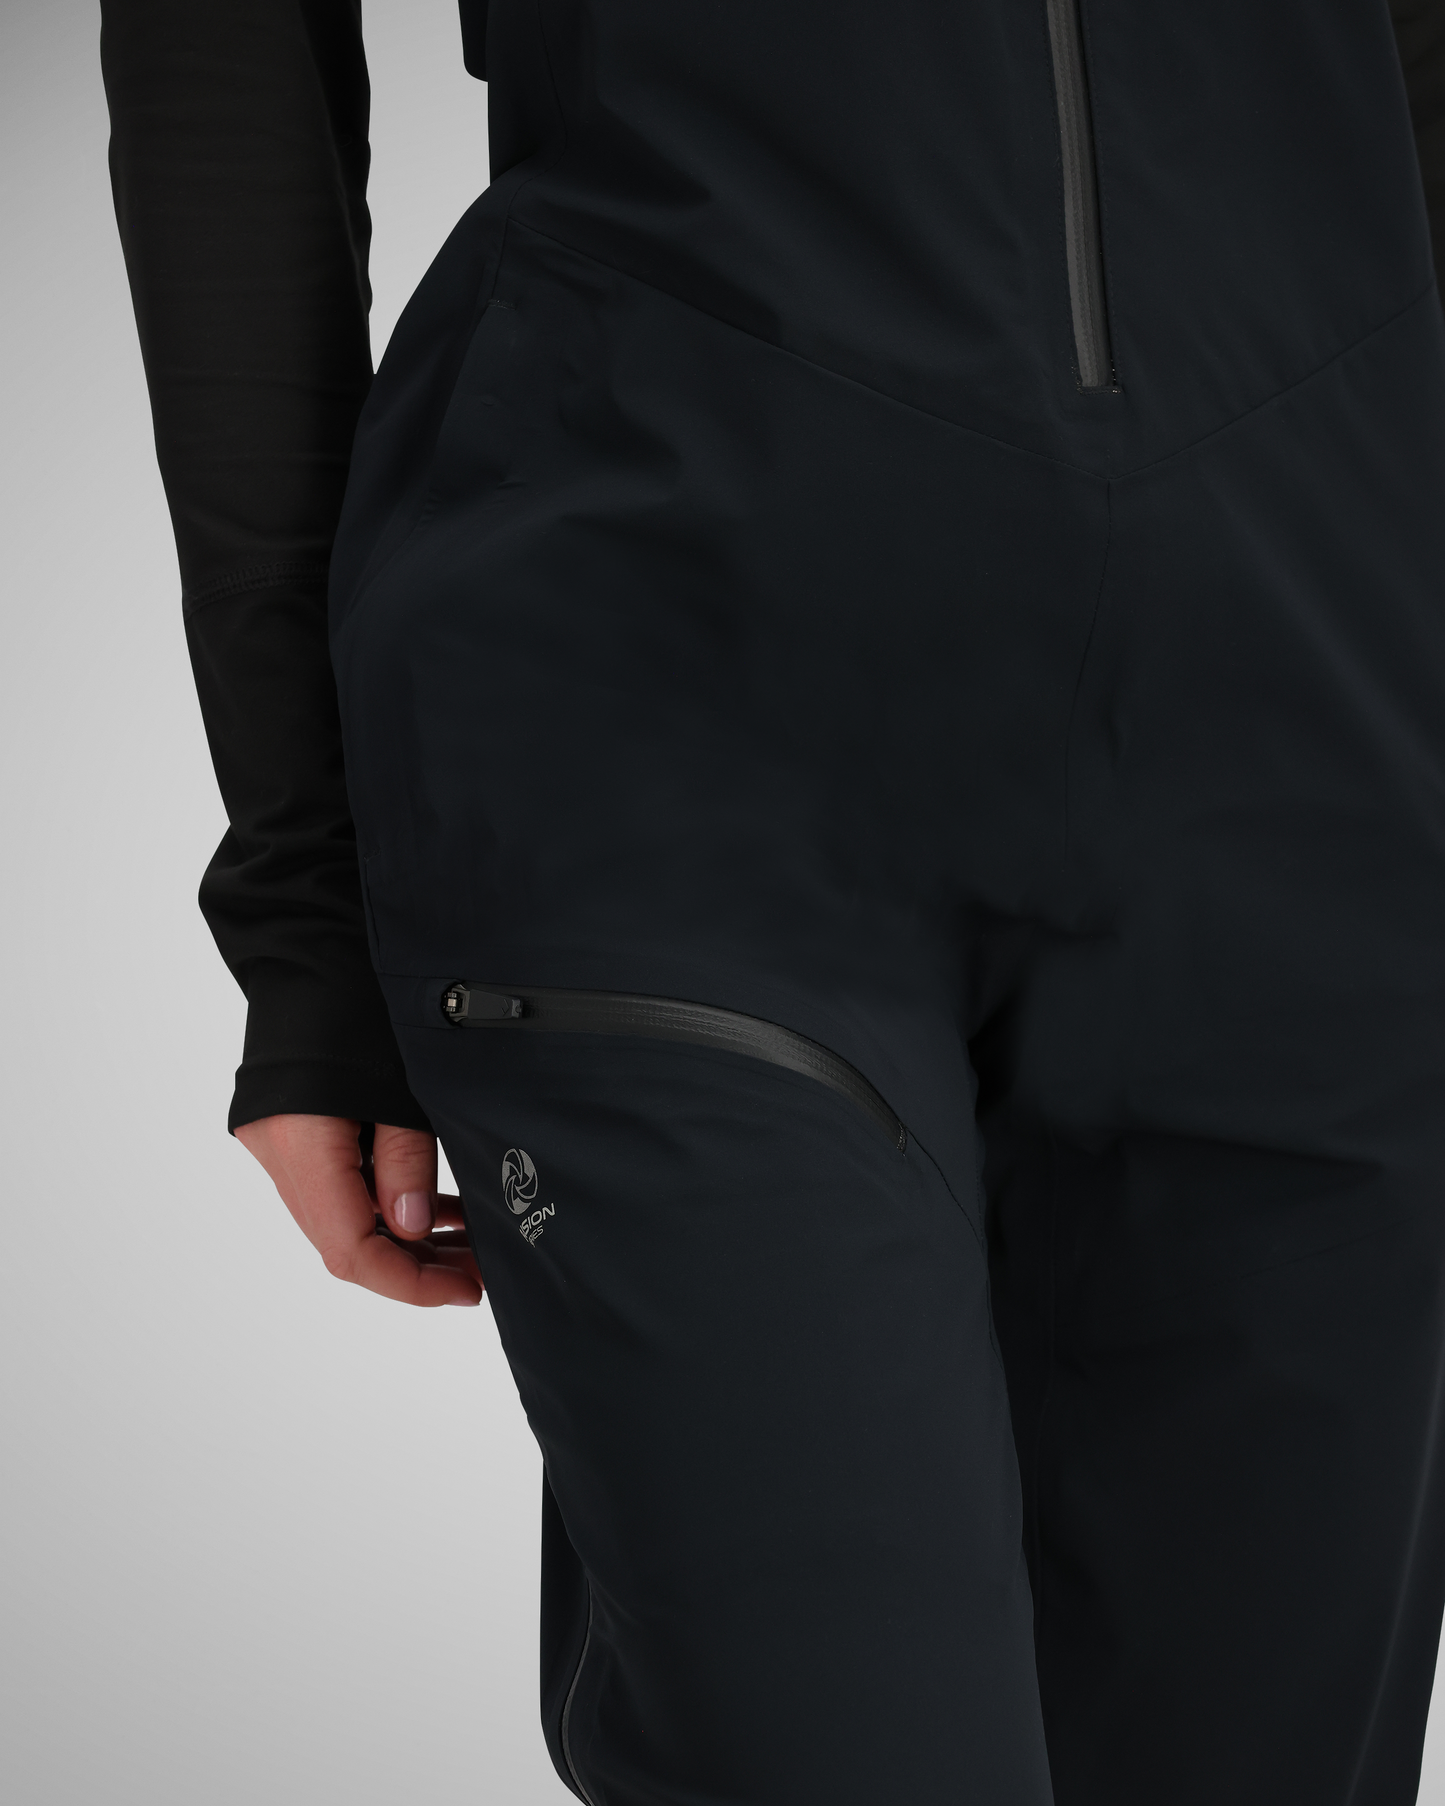 YKK® AquaGuard® zippers | A waterproof polyurethane-coated zipper with smooth gliding characteristics, flexibility for garment use, and proven durability to withstand wear and pressure.